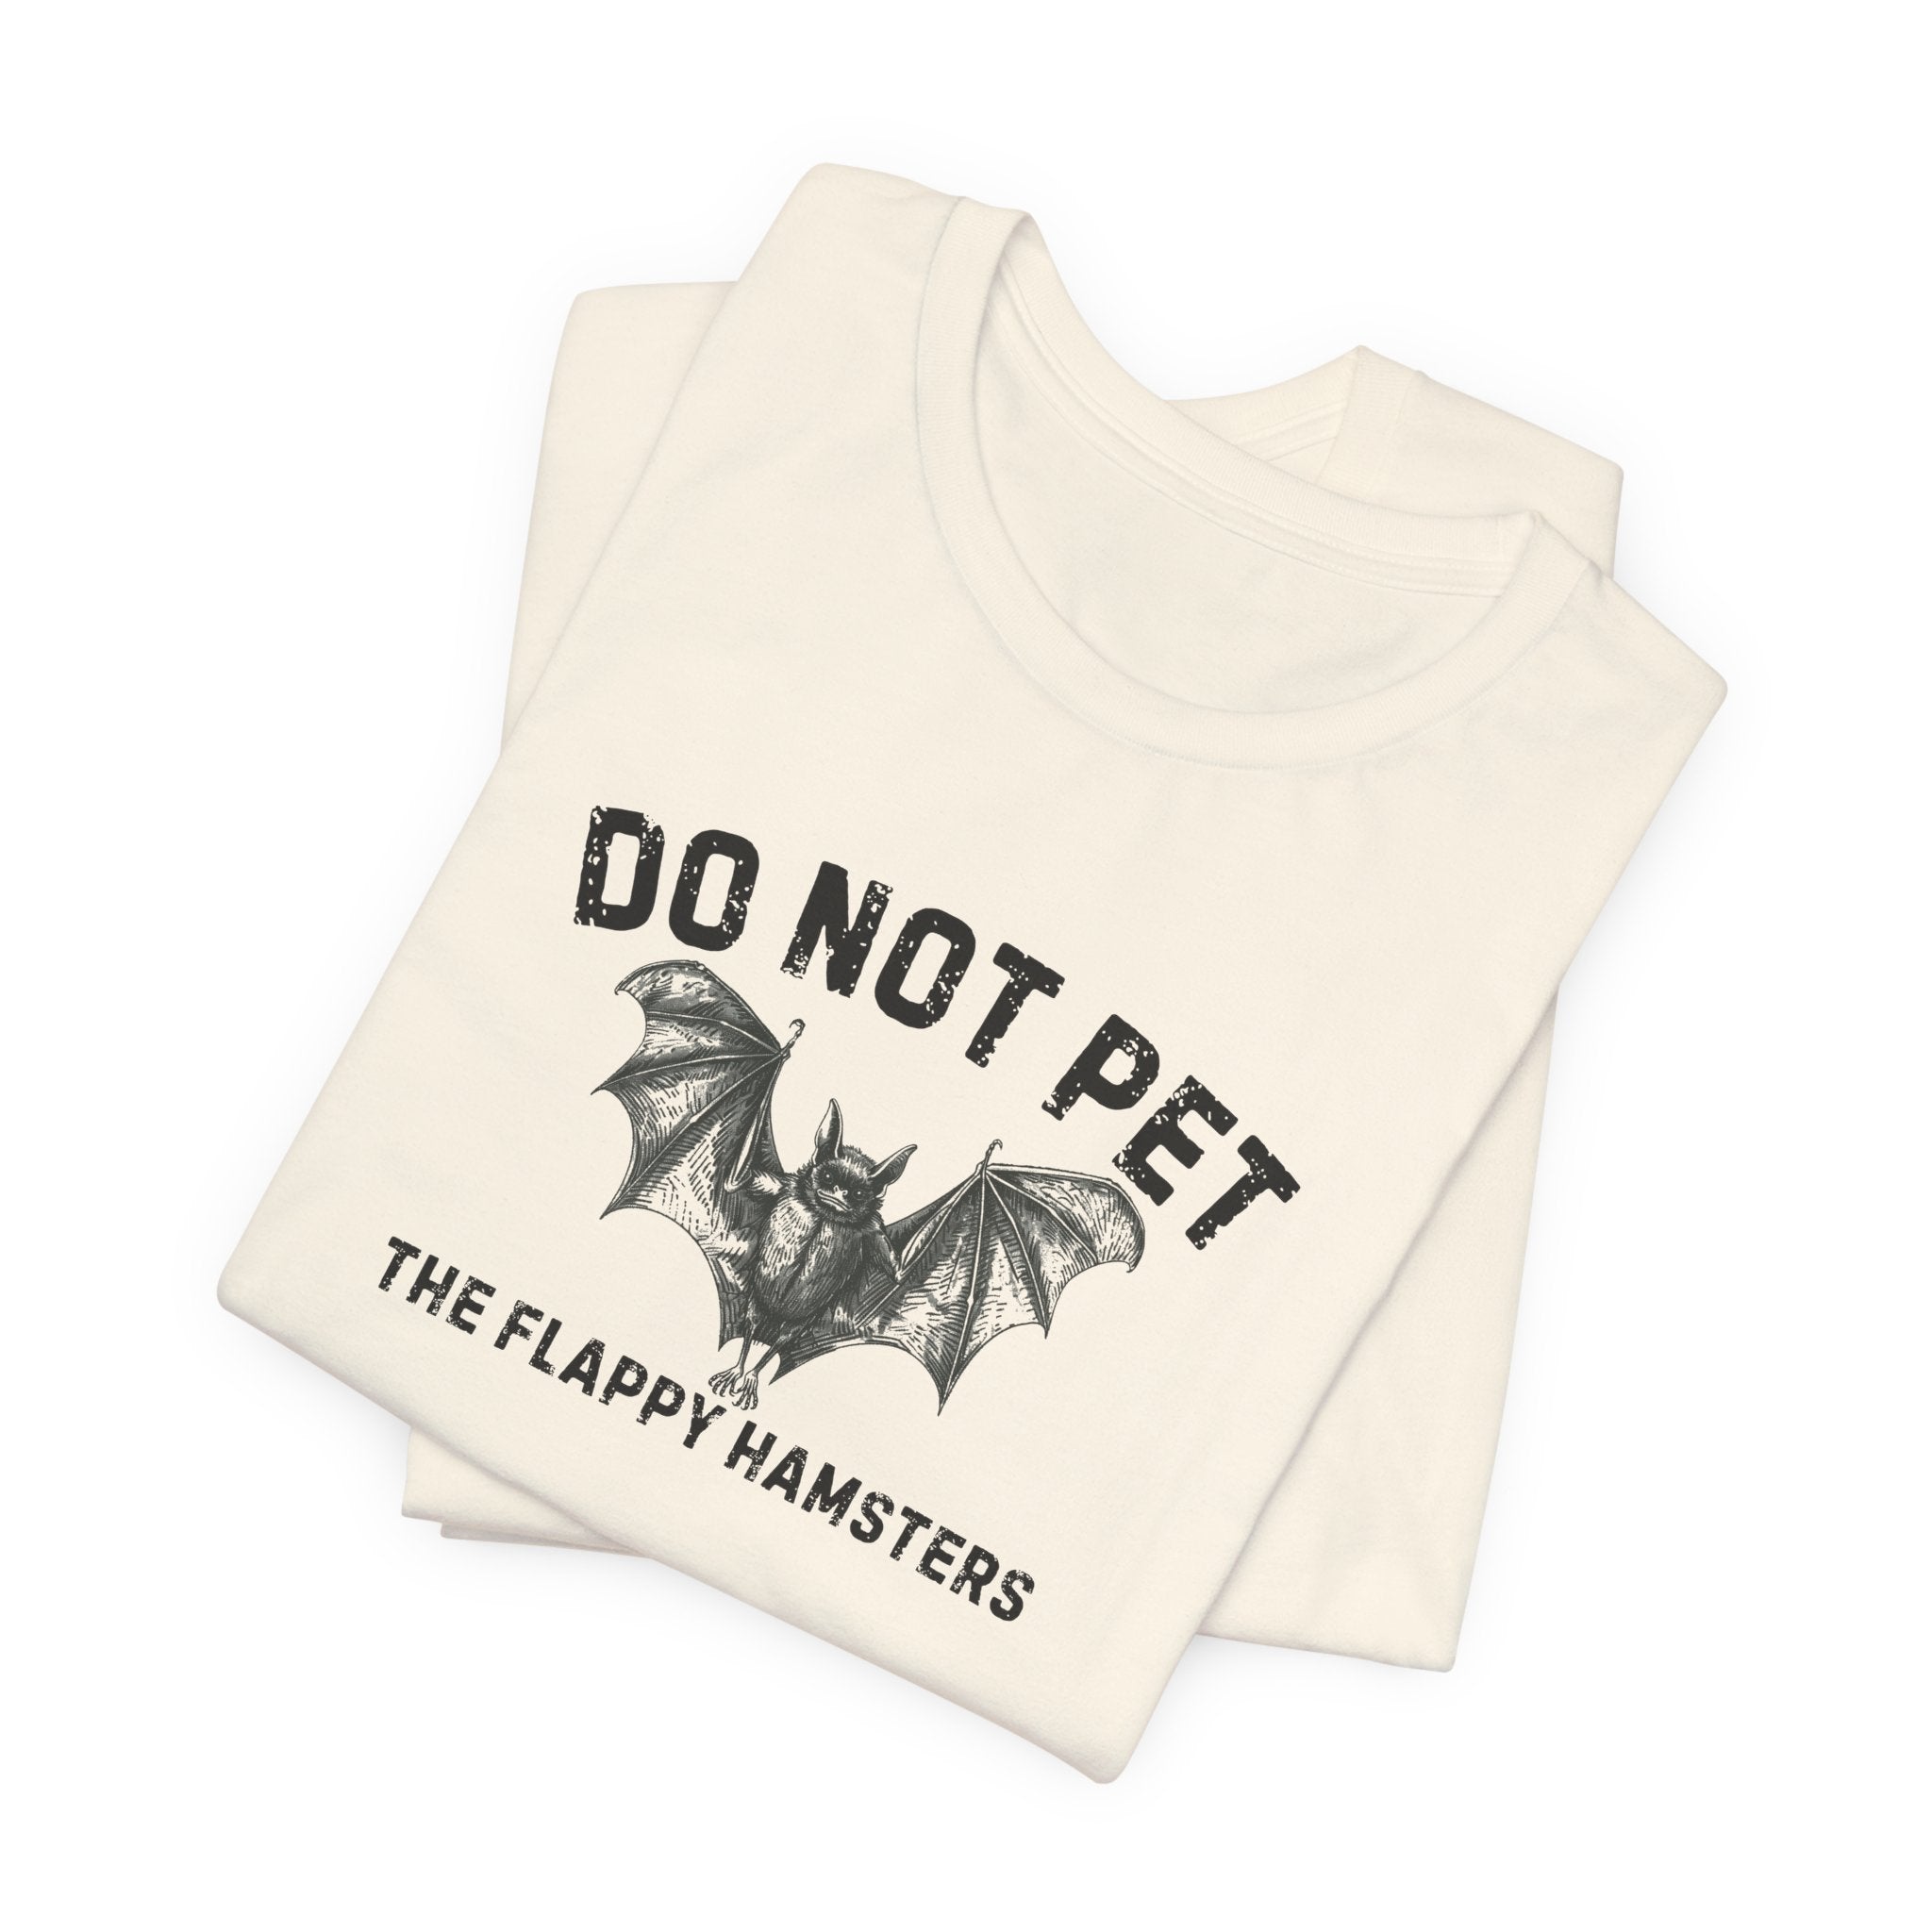 Do Not Pet The Flappy Hamsters Shirt Funny Bat Lover Tee